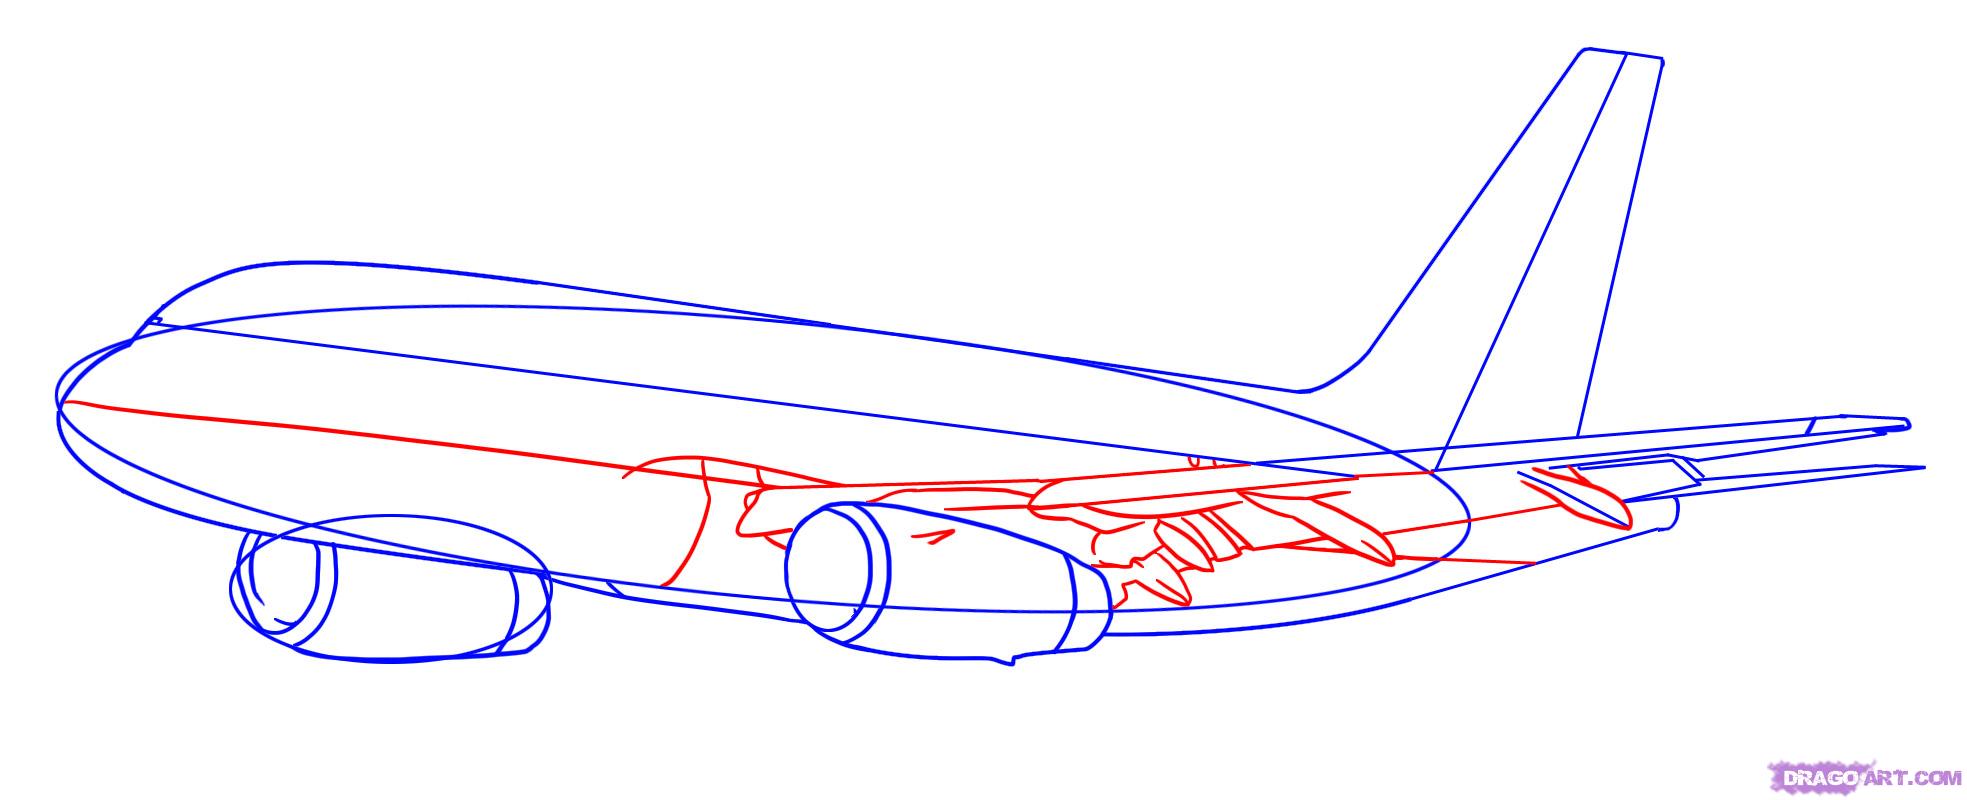 How to Draw an Aeroplane, Step by Step, Airplanes, Transportation ...